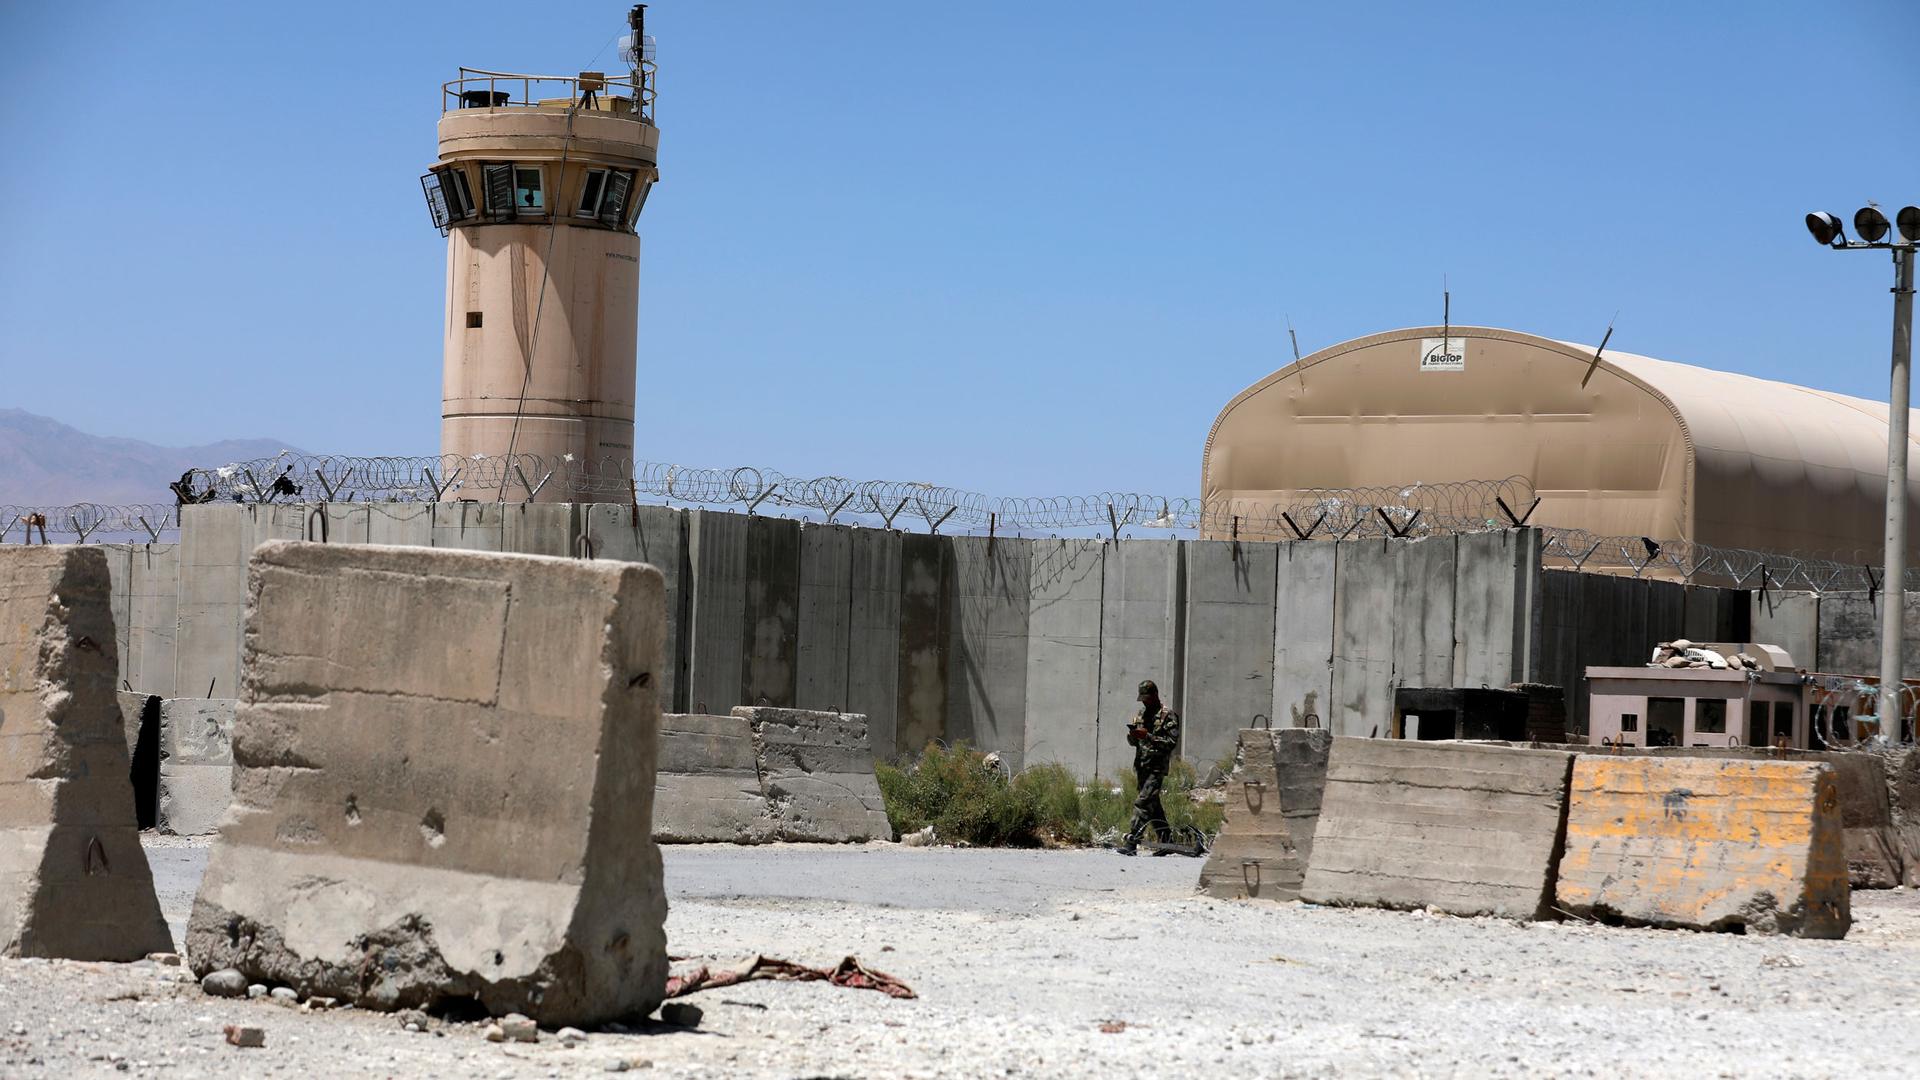 A tall control tower is shown with large concrete barriers on the ground nearby with barbed wire on top.